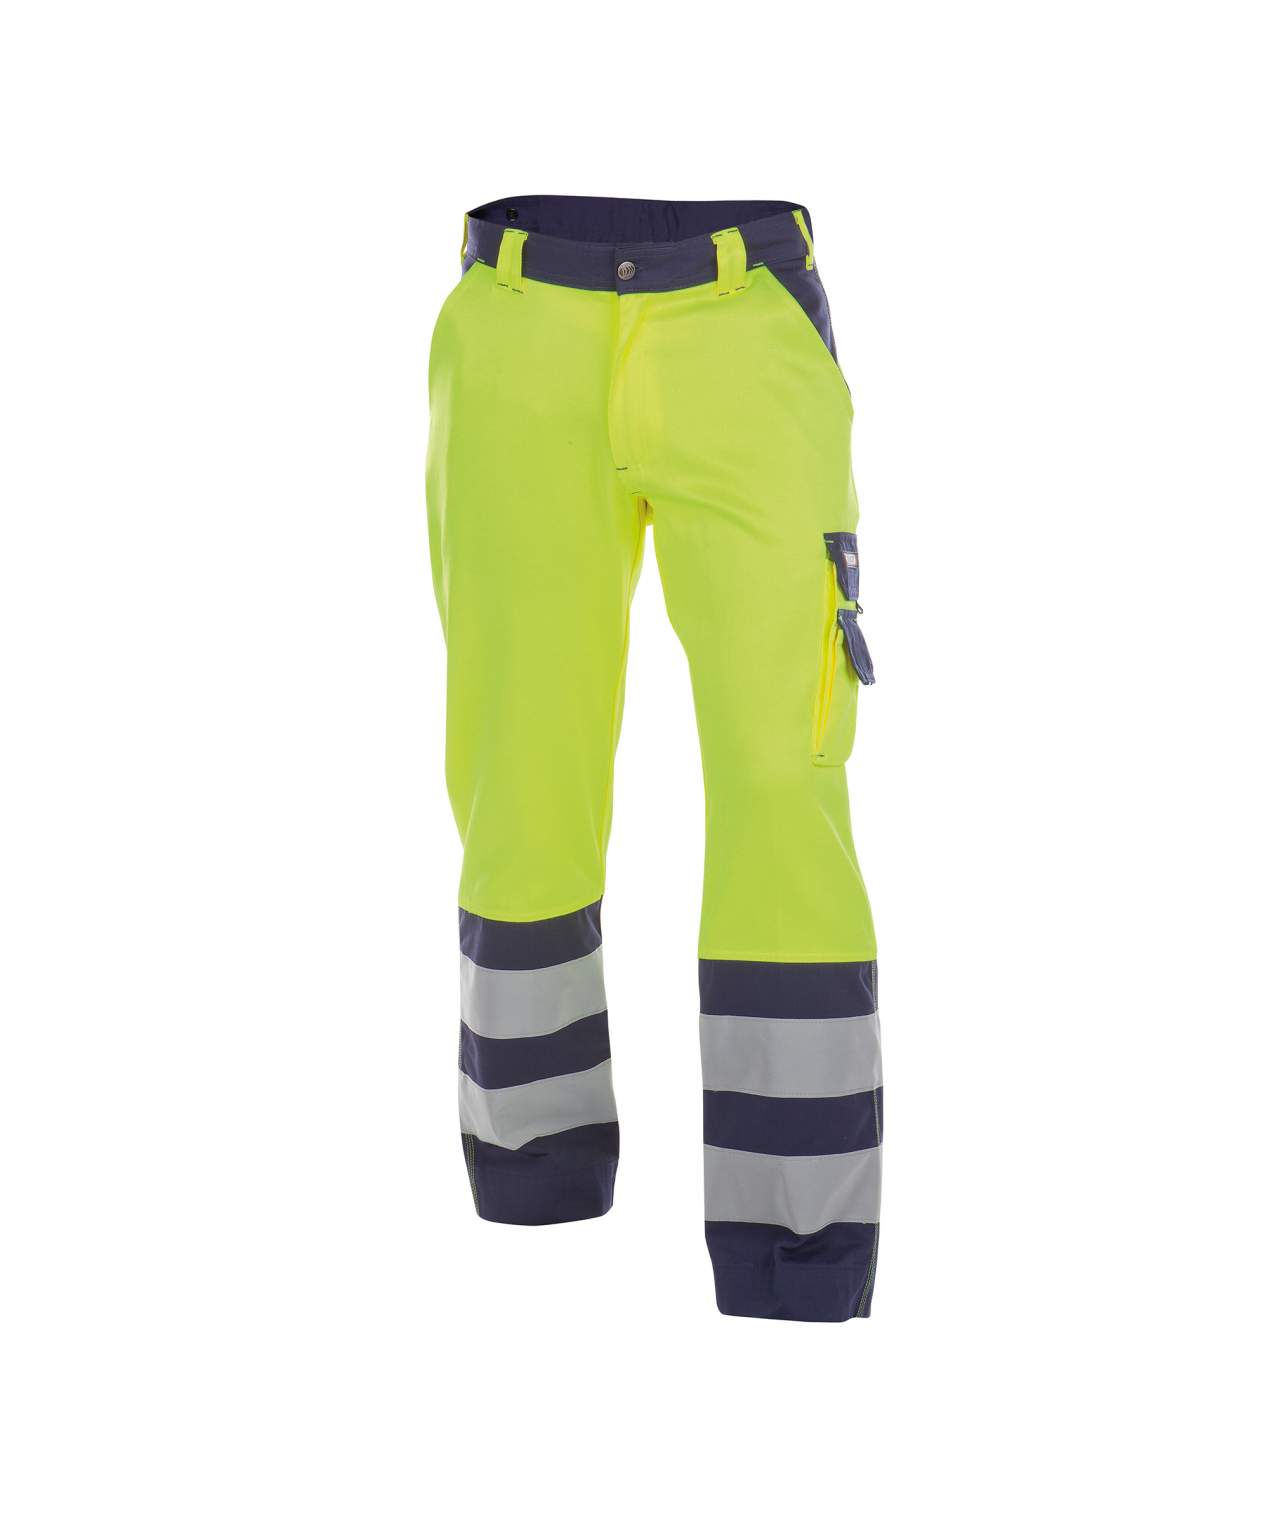 lancaster high visibility work trousers fluo yellow navy front